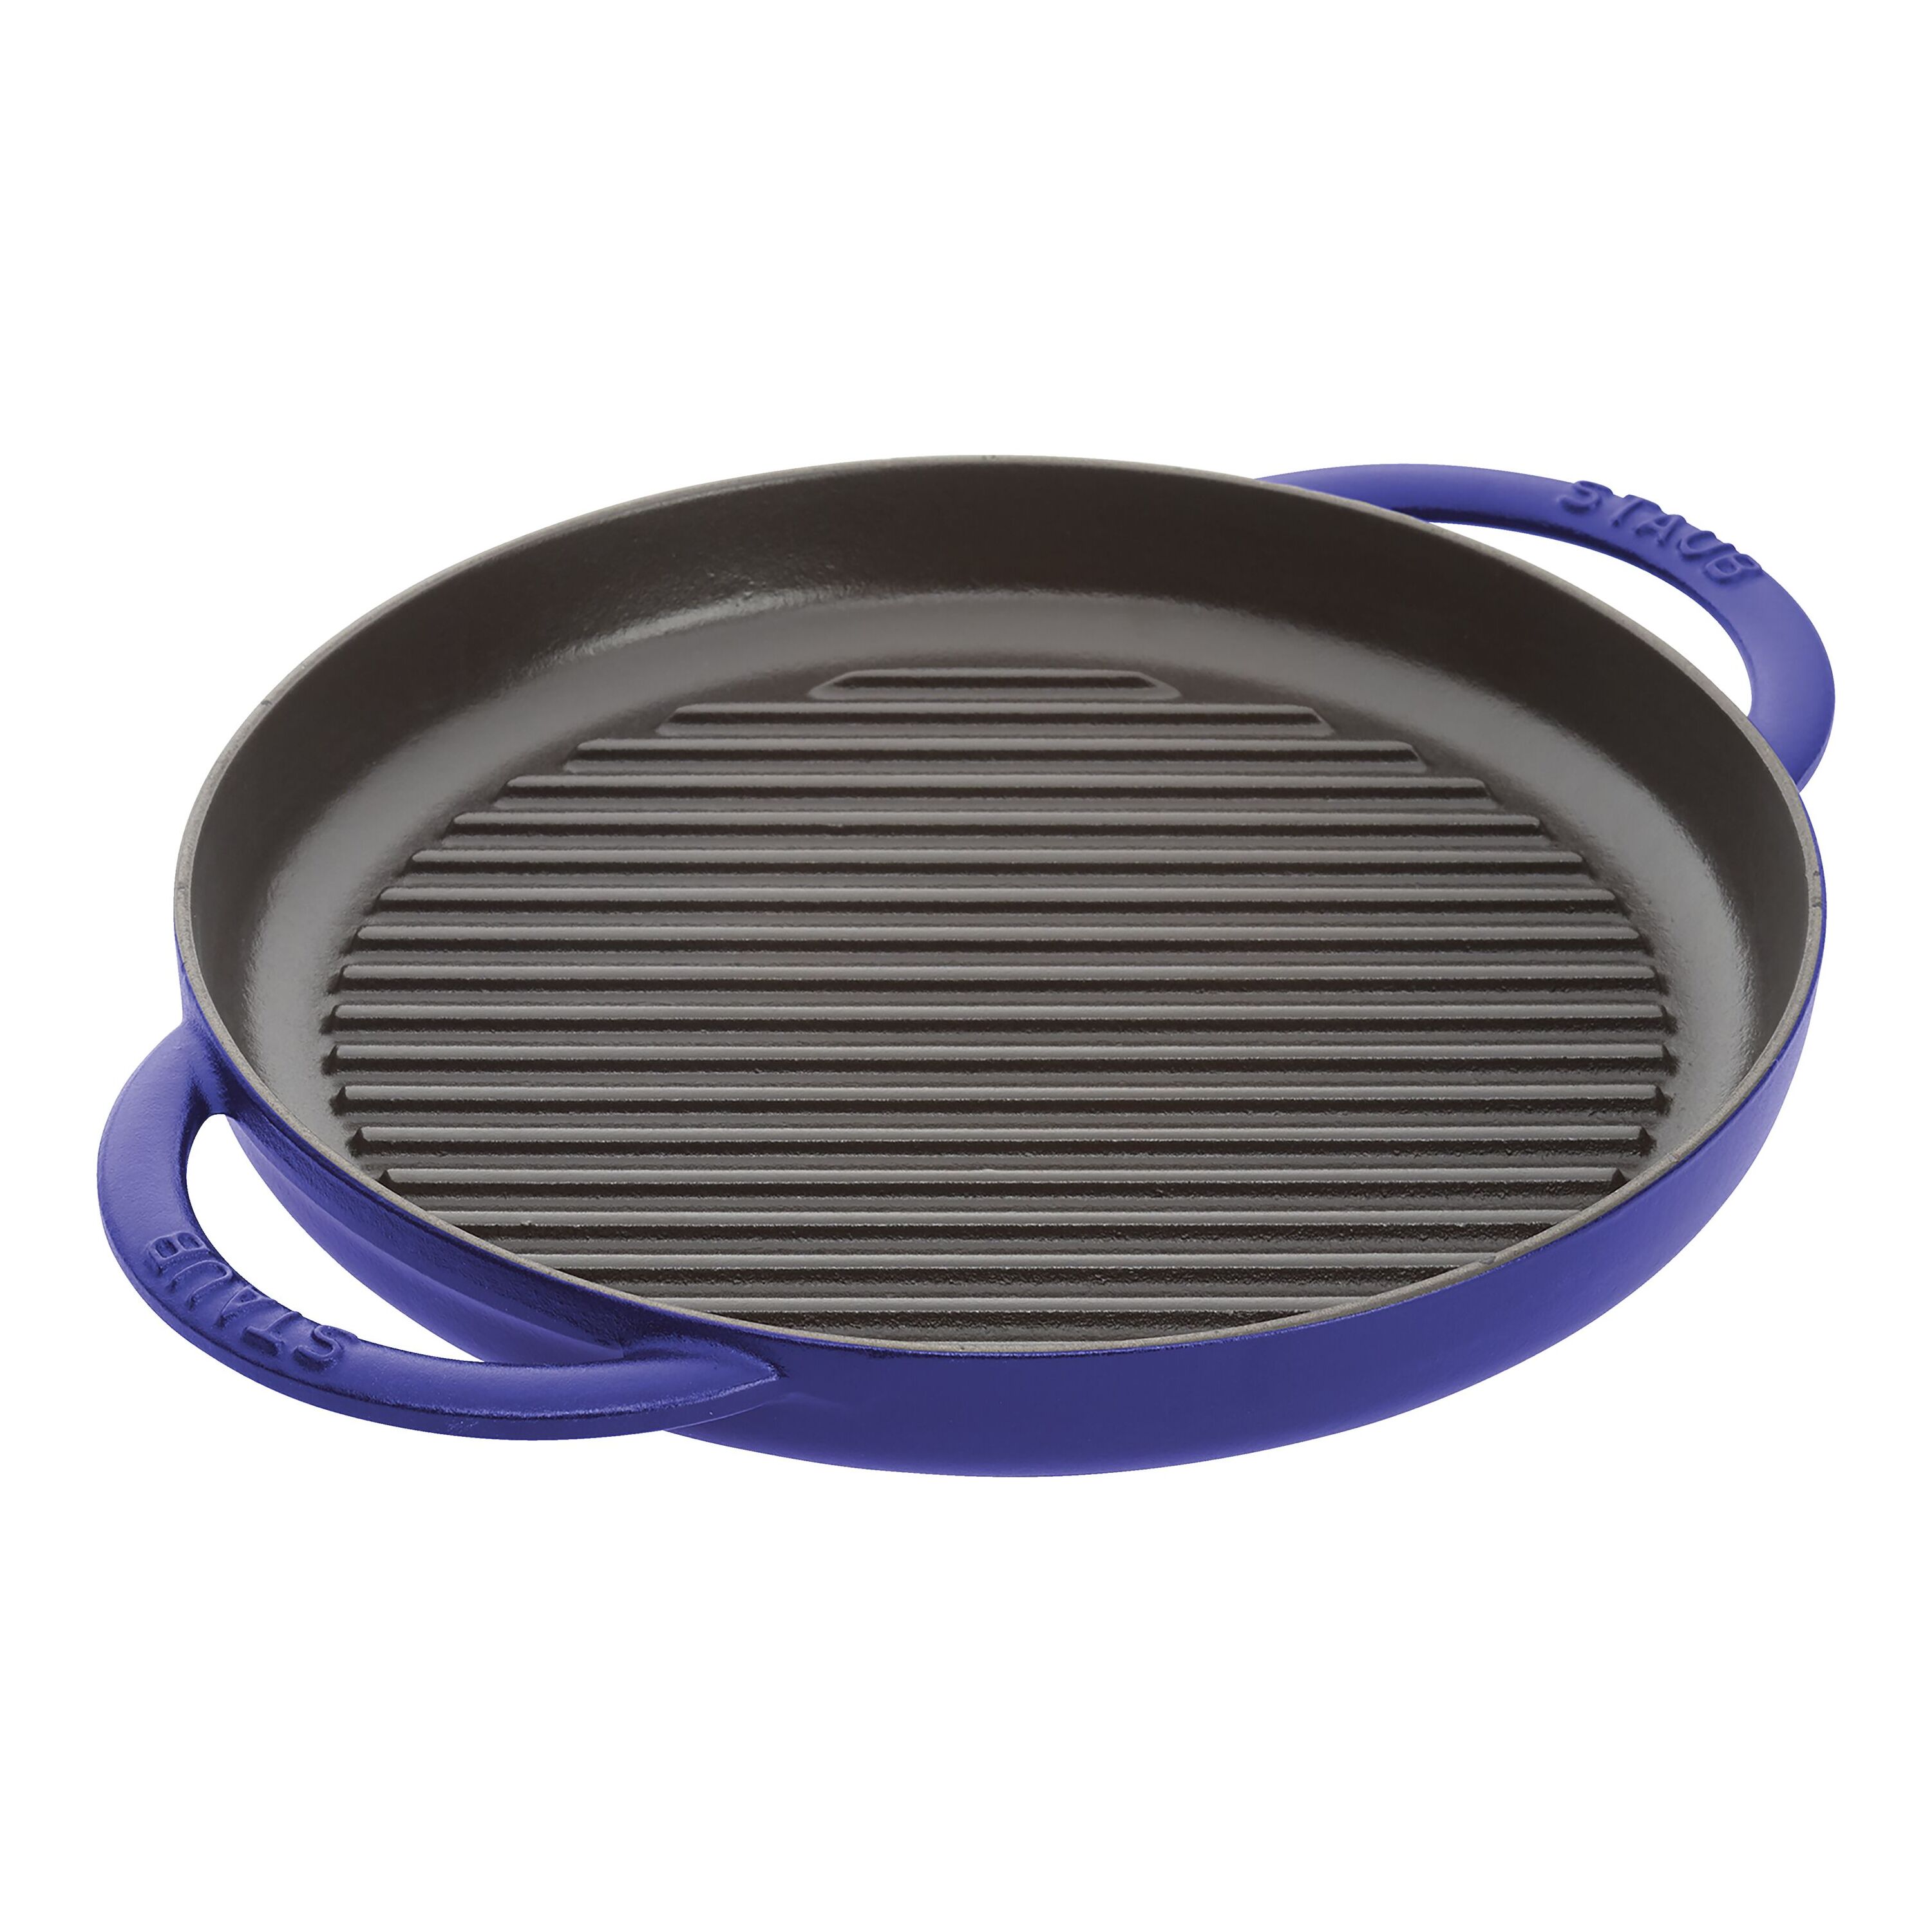 10 Inch Square Enamel Cast Iron Grill Pan